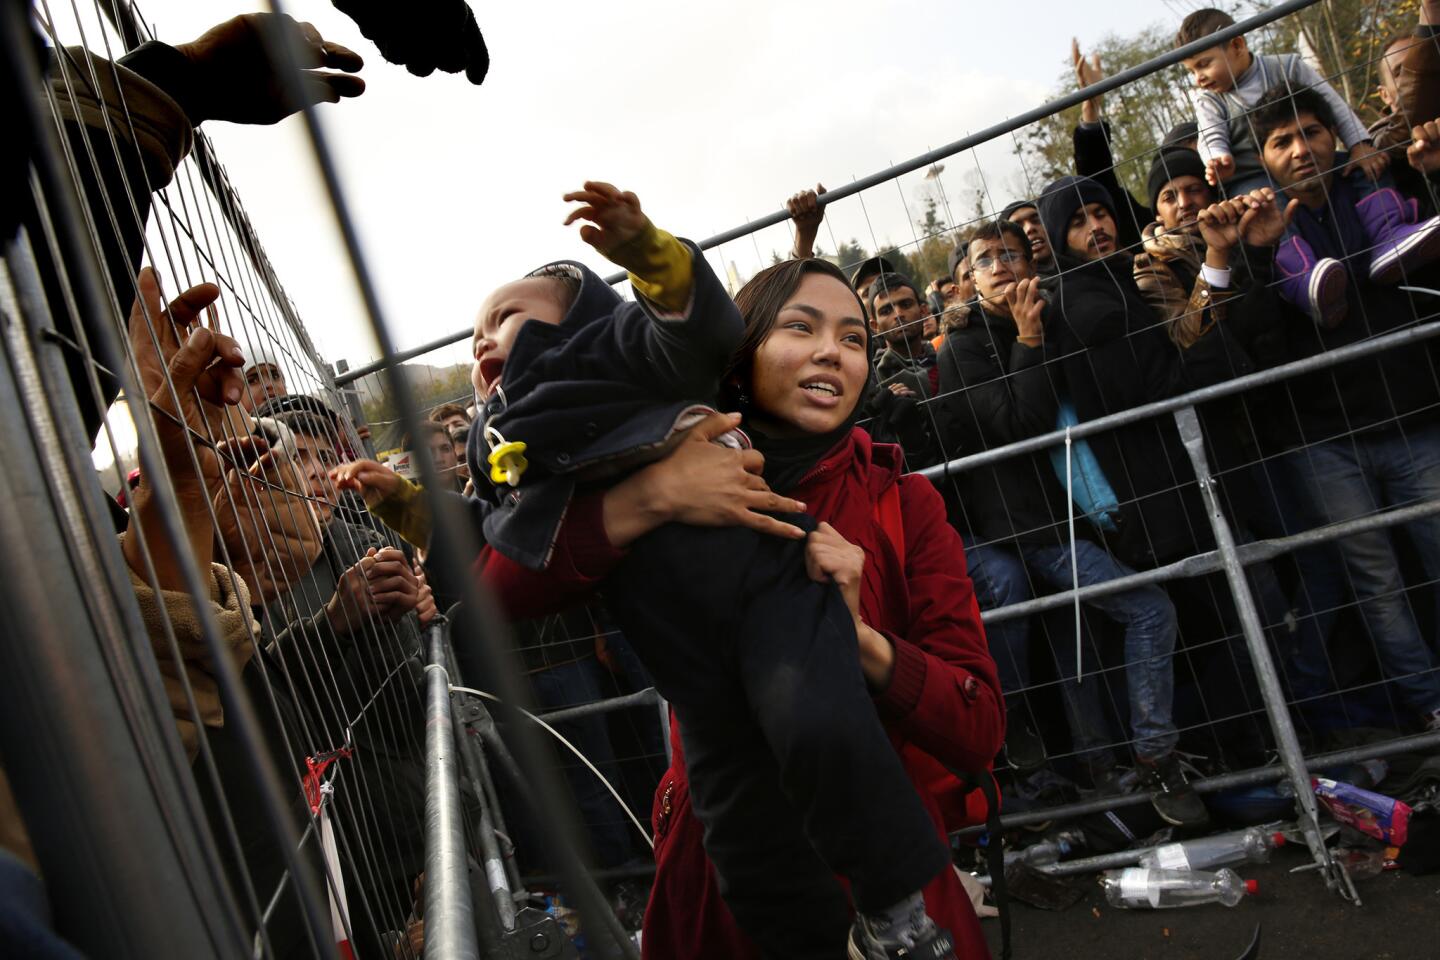 Narges Heydari, 15, catches her crying brother, Matin, 1, as he is lifted over the fence at the Austrian border. Narges climbed the fence first because of the crush of people. She arrived from Afghanistan with her parents and three siblings.